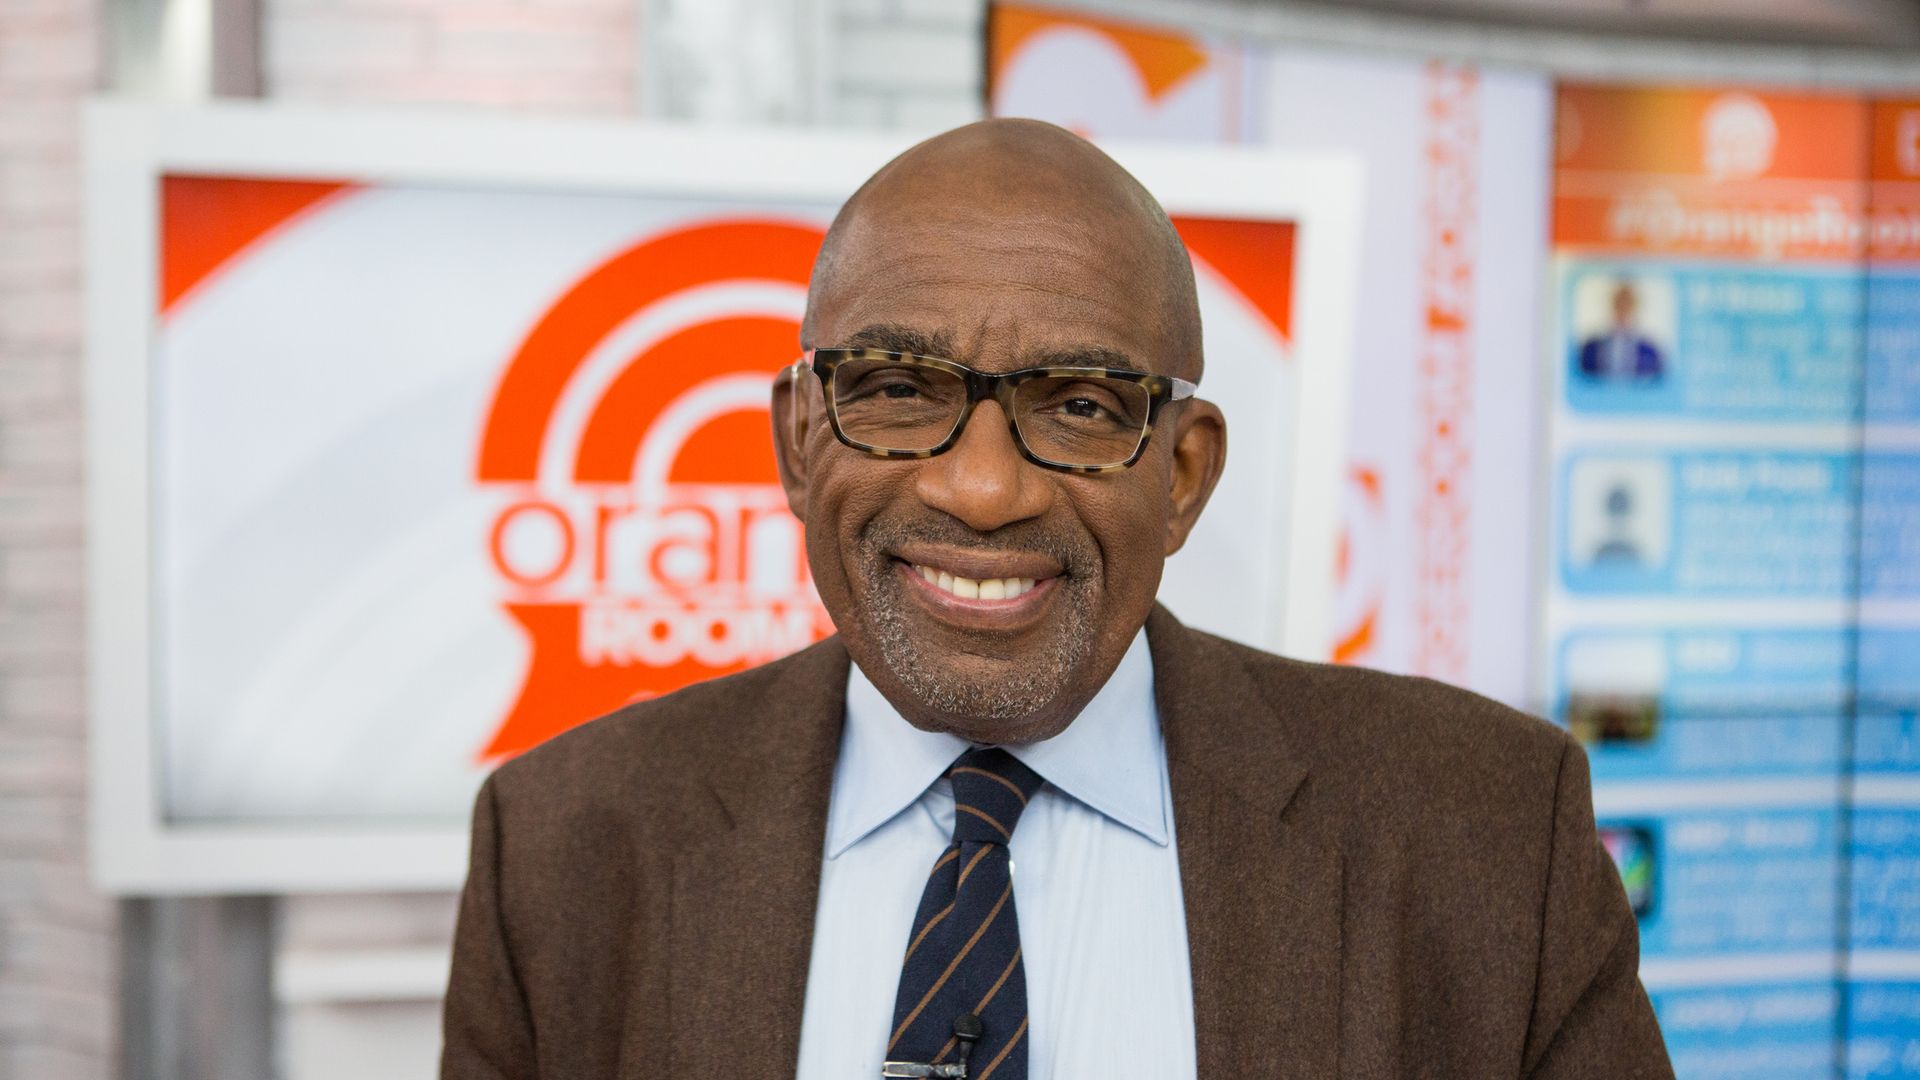 Al Roker causes chaos live on Today - and his co-star has this to say